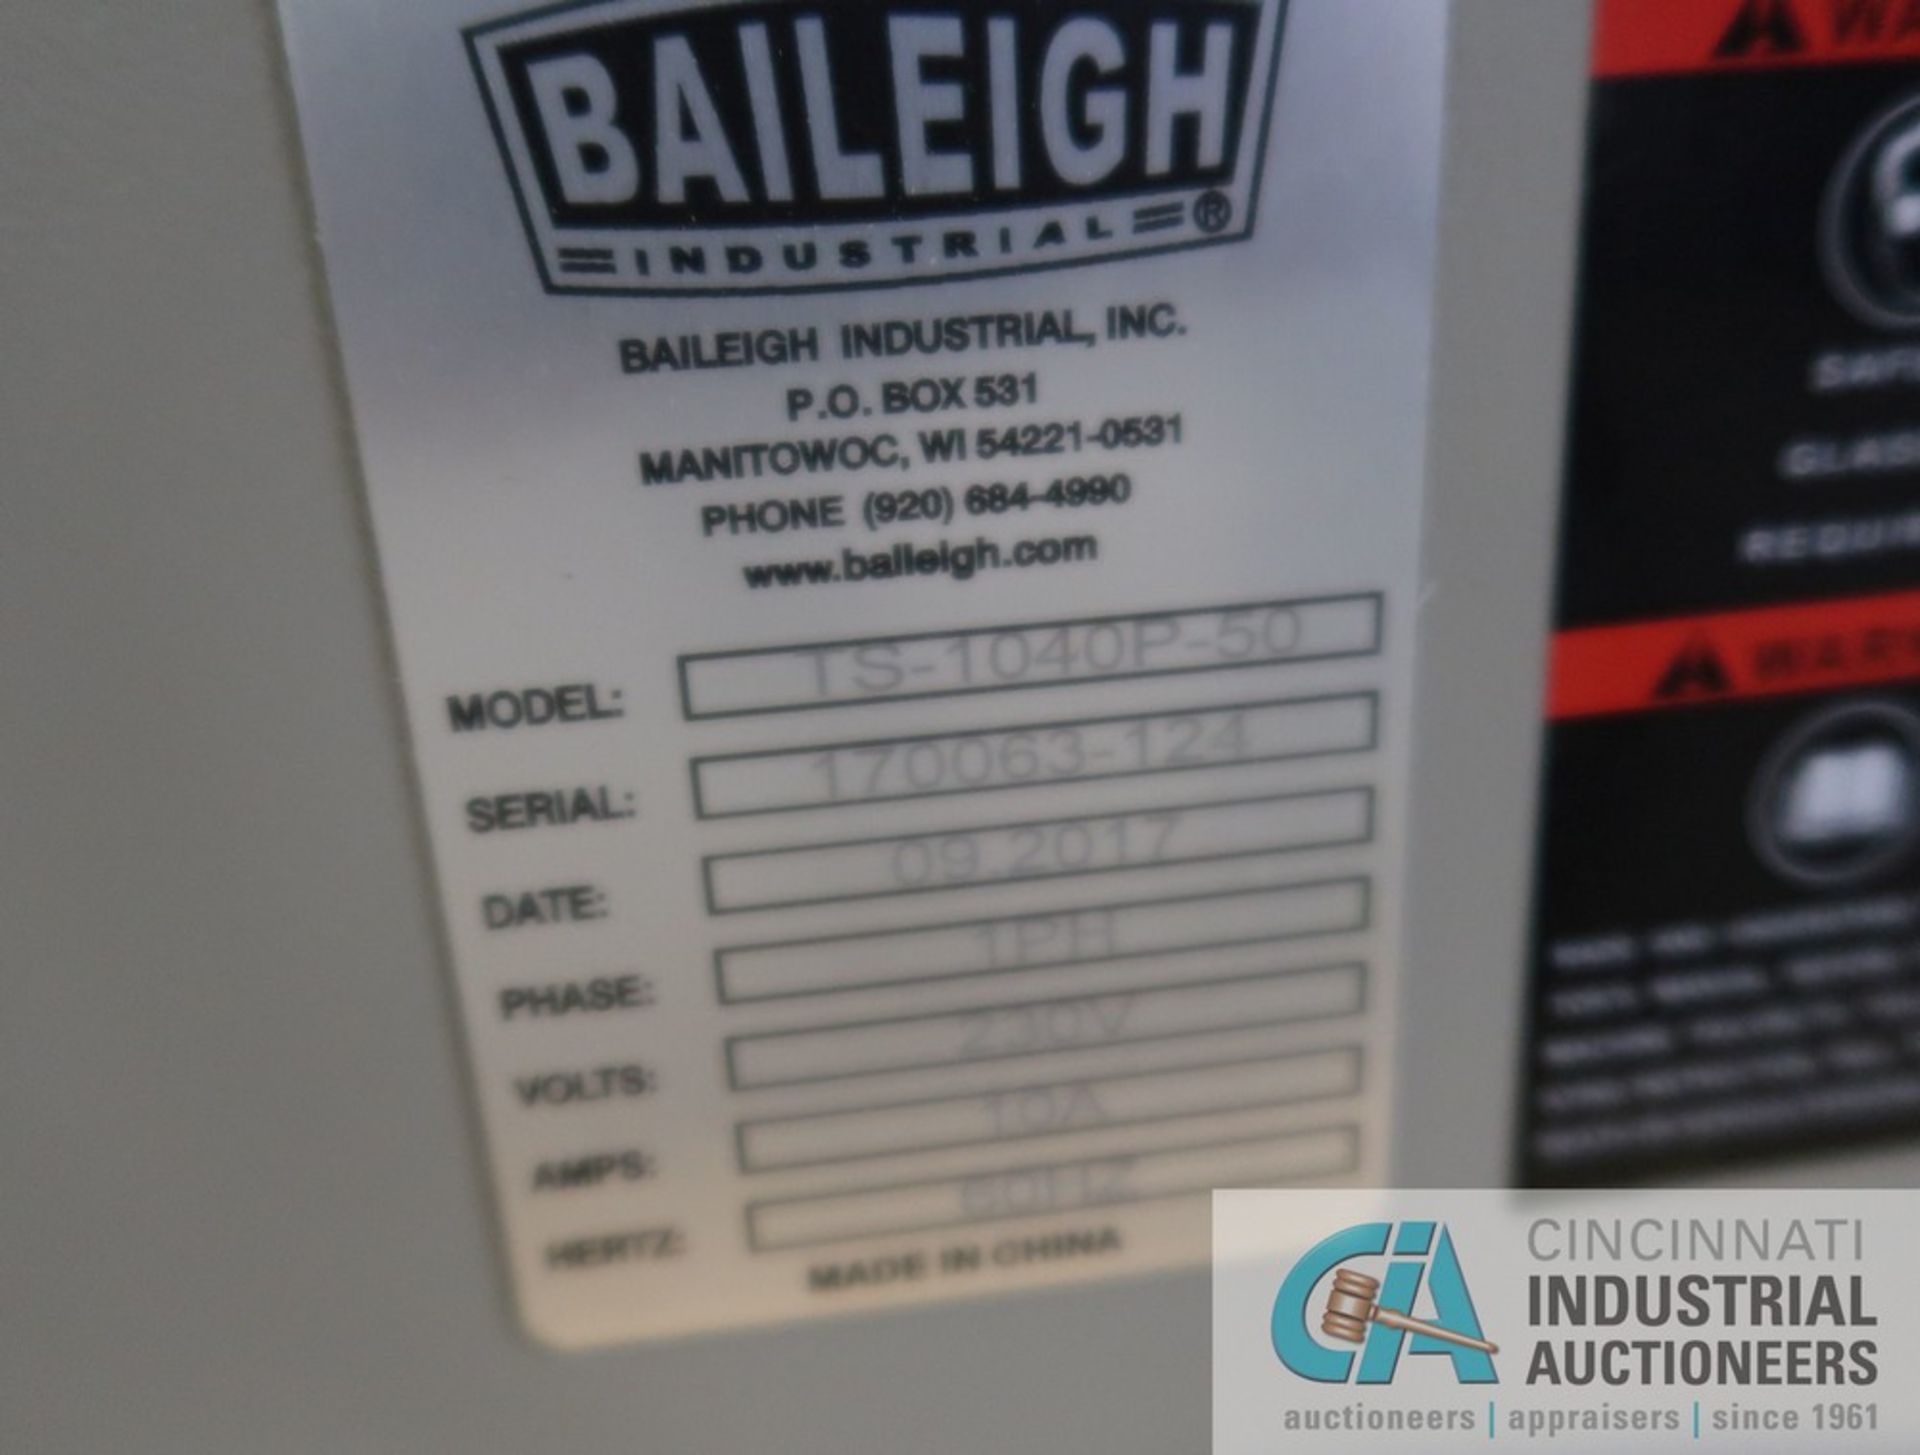 10" BAILEIGH MODEL TS-1040P050 TABLE SAW; S/N 170063-124 (NEW 9-2017), WITH T-SQUARE RIP FENCE - Image 7 of 8